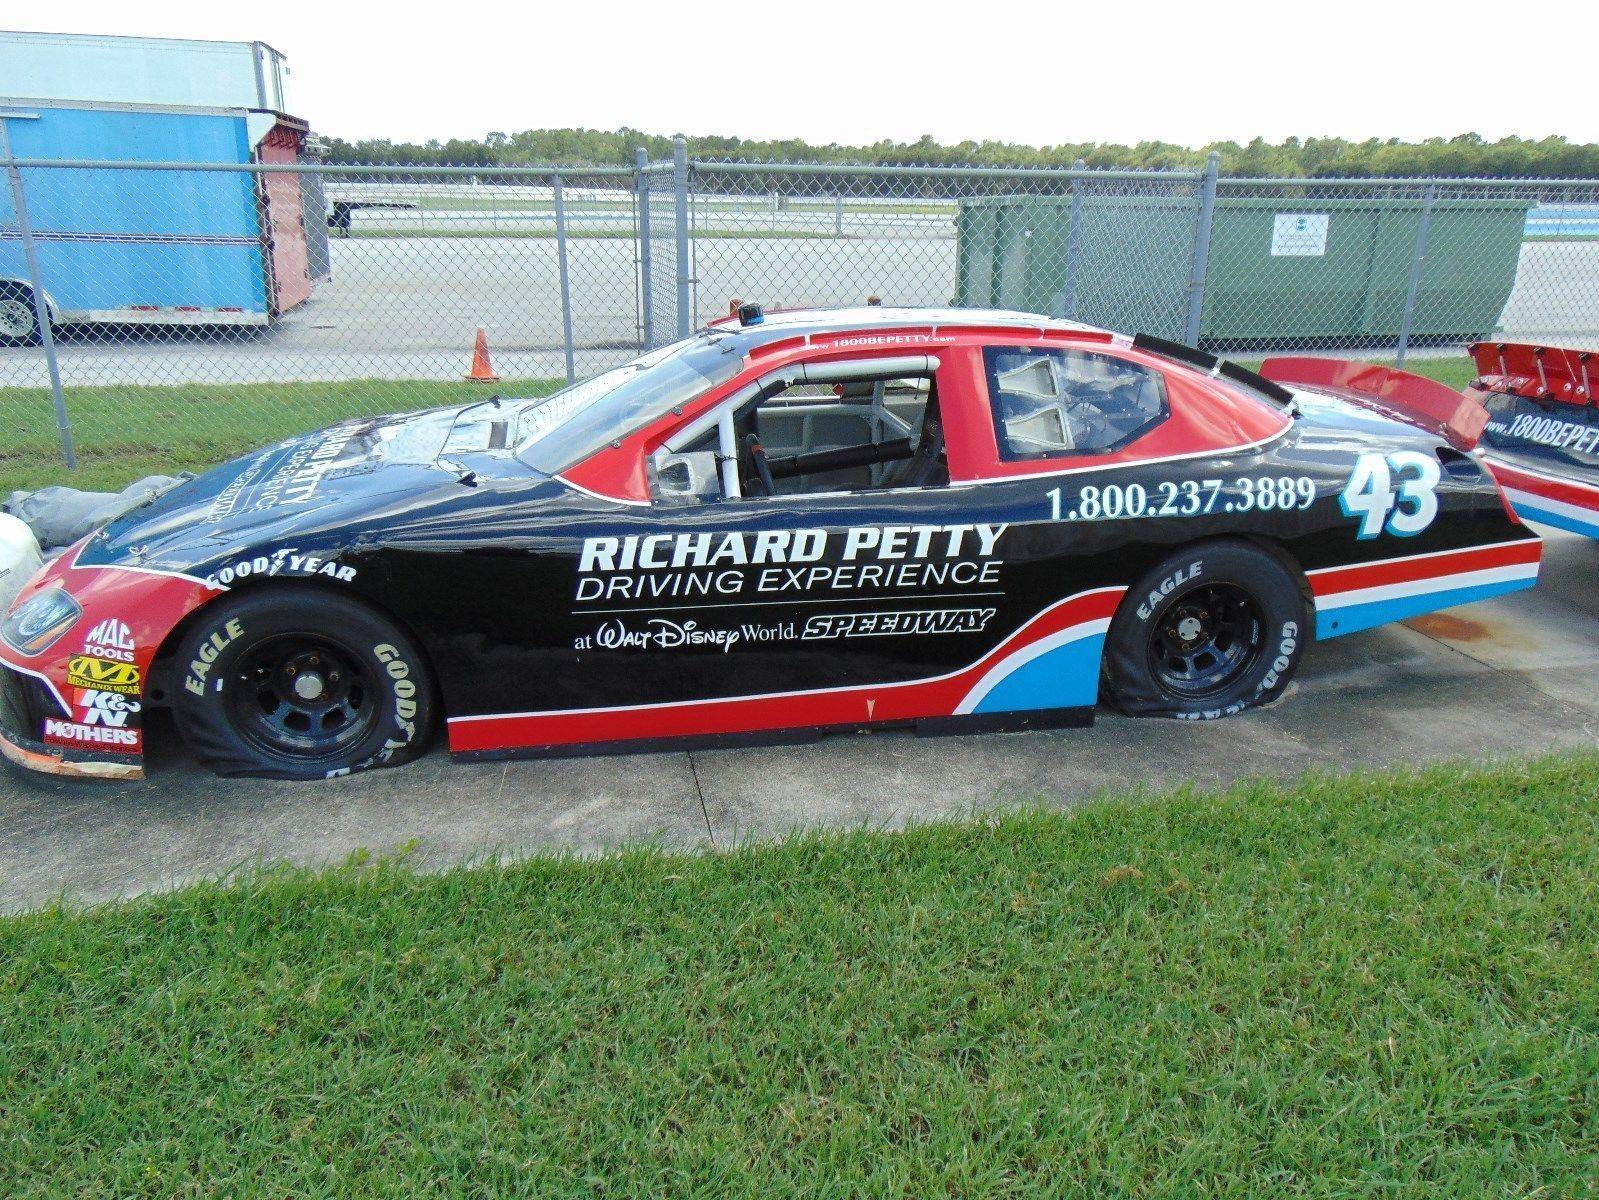 Former NASCAR racers used at Walt Disney World's Richard Petty Driving Experience sold on Ebay